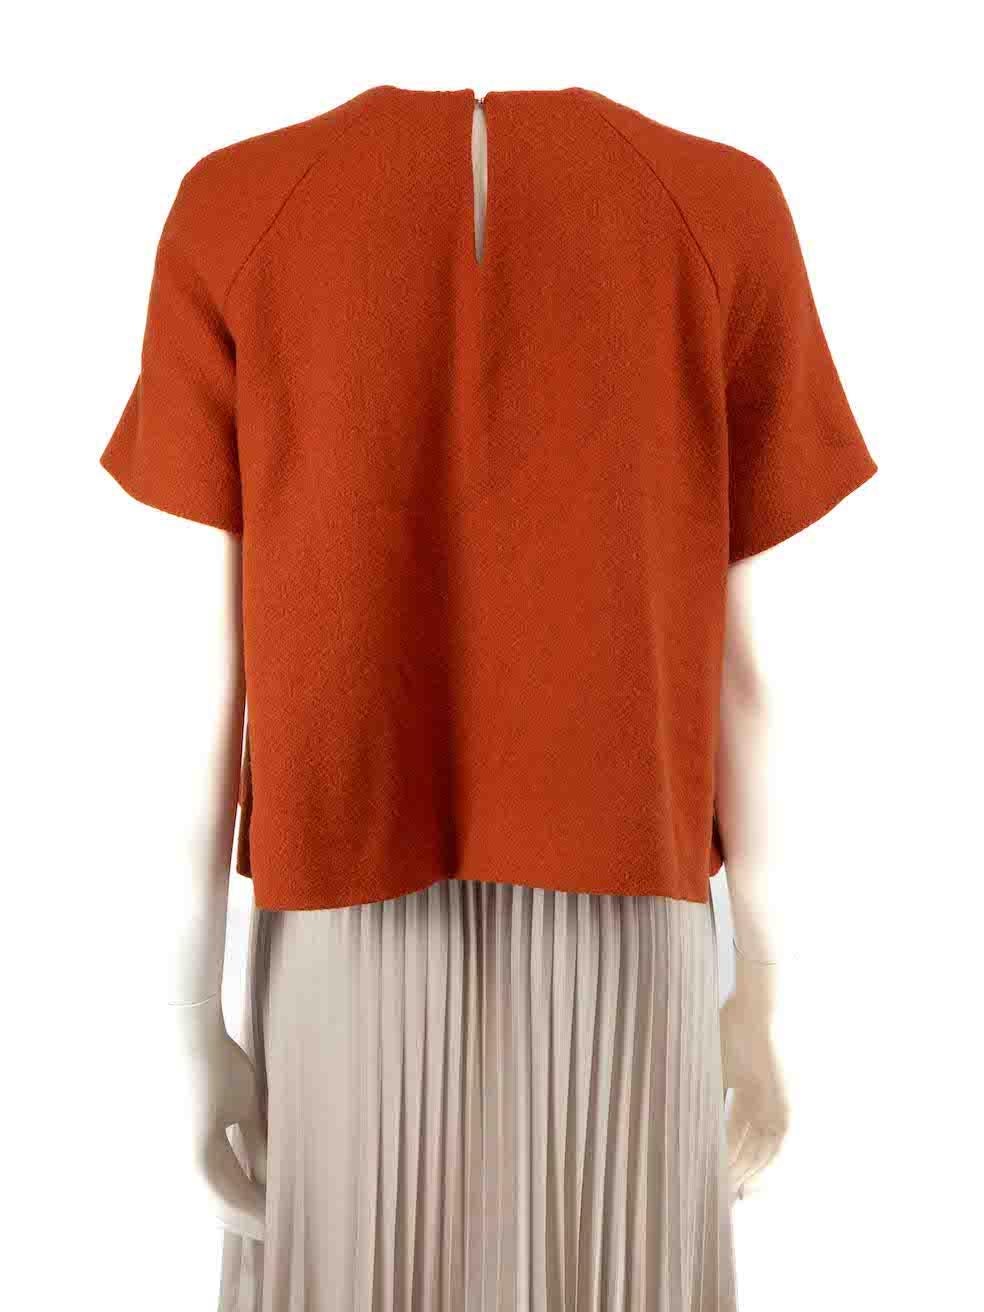 Emilia Wickstead Orange Wool Round Neck Top Size L In New Condition For Sale In London, GB